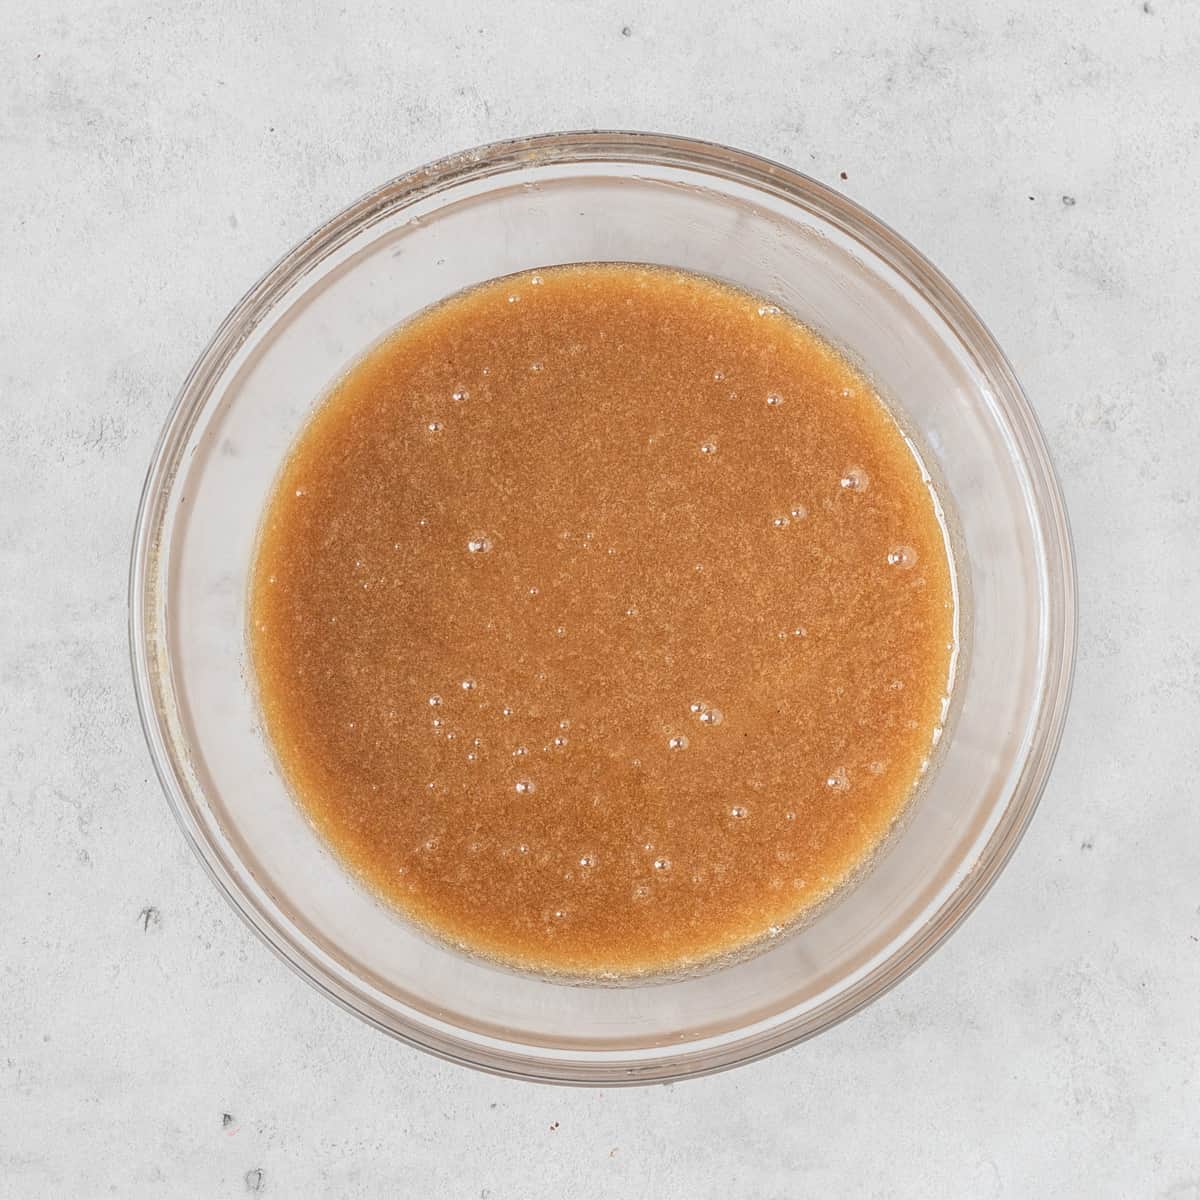 the wet ingredients and sugars combined in a glass bowl on a grey background.